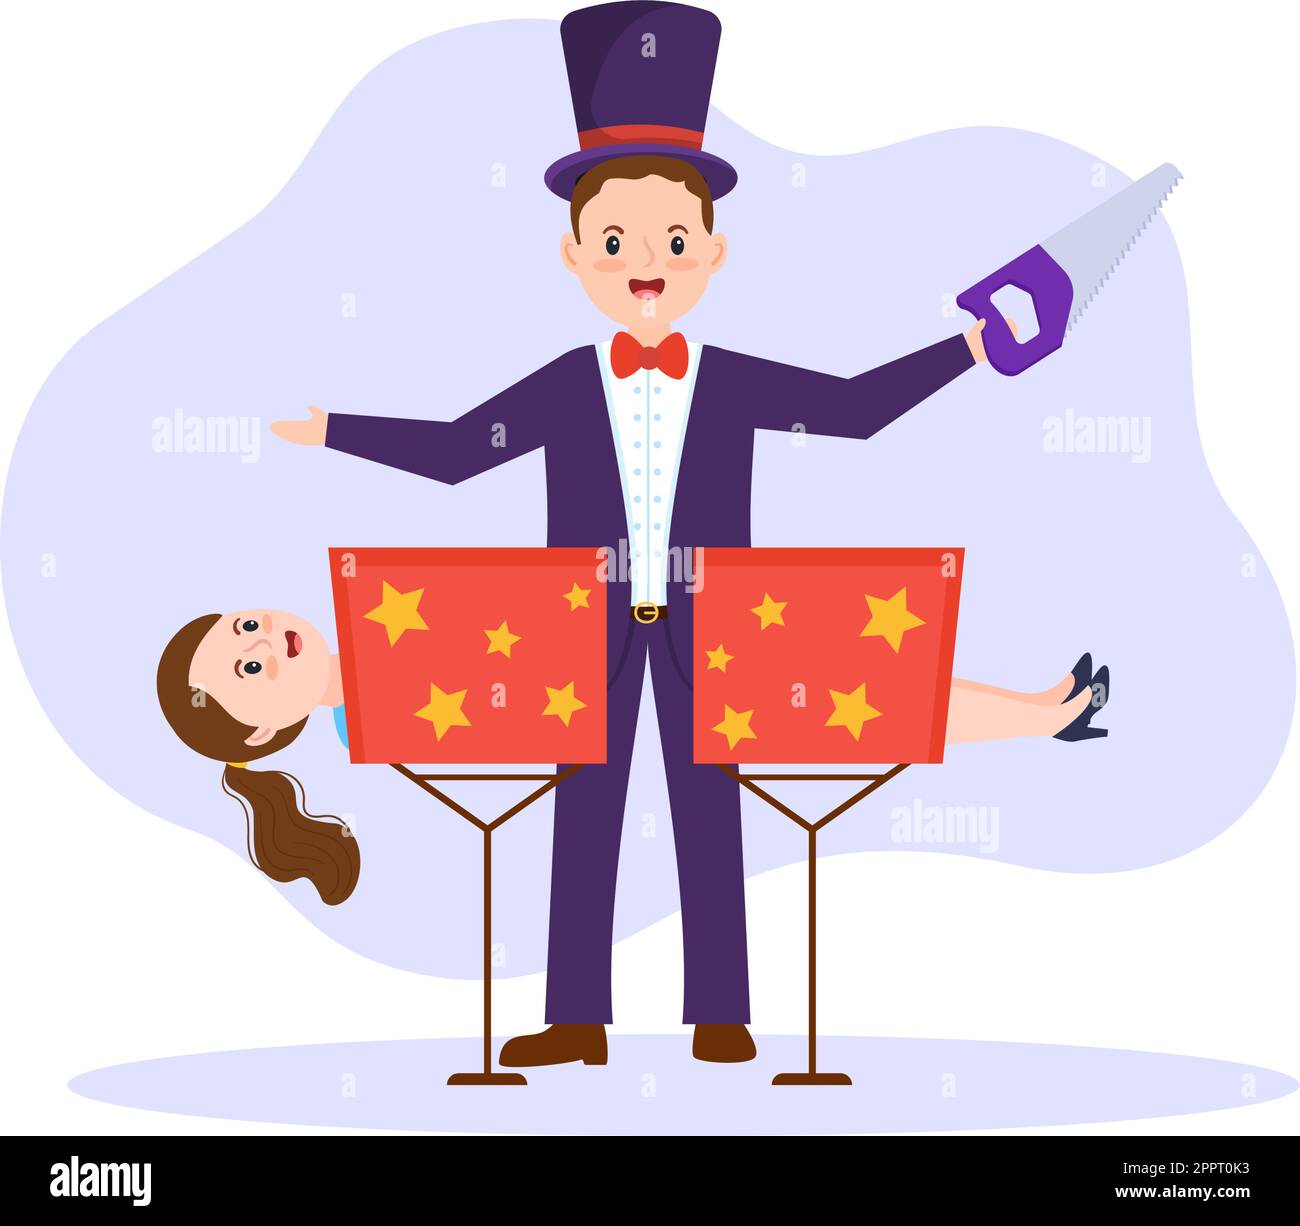 Magician Illusionist Conjuring Tricks and Waving a Magic Wand above his Mysterious Hat on a Stage in Template Hand Drawn Cartoon Flat Illustration Stock Vector